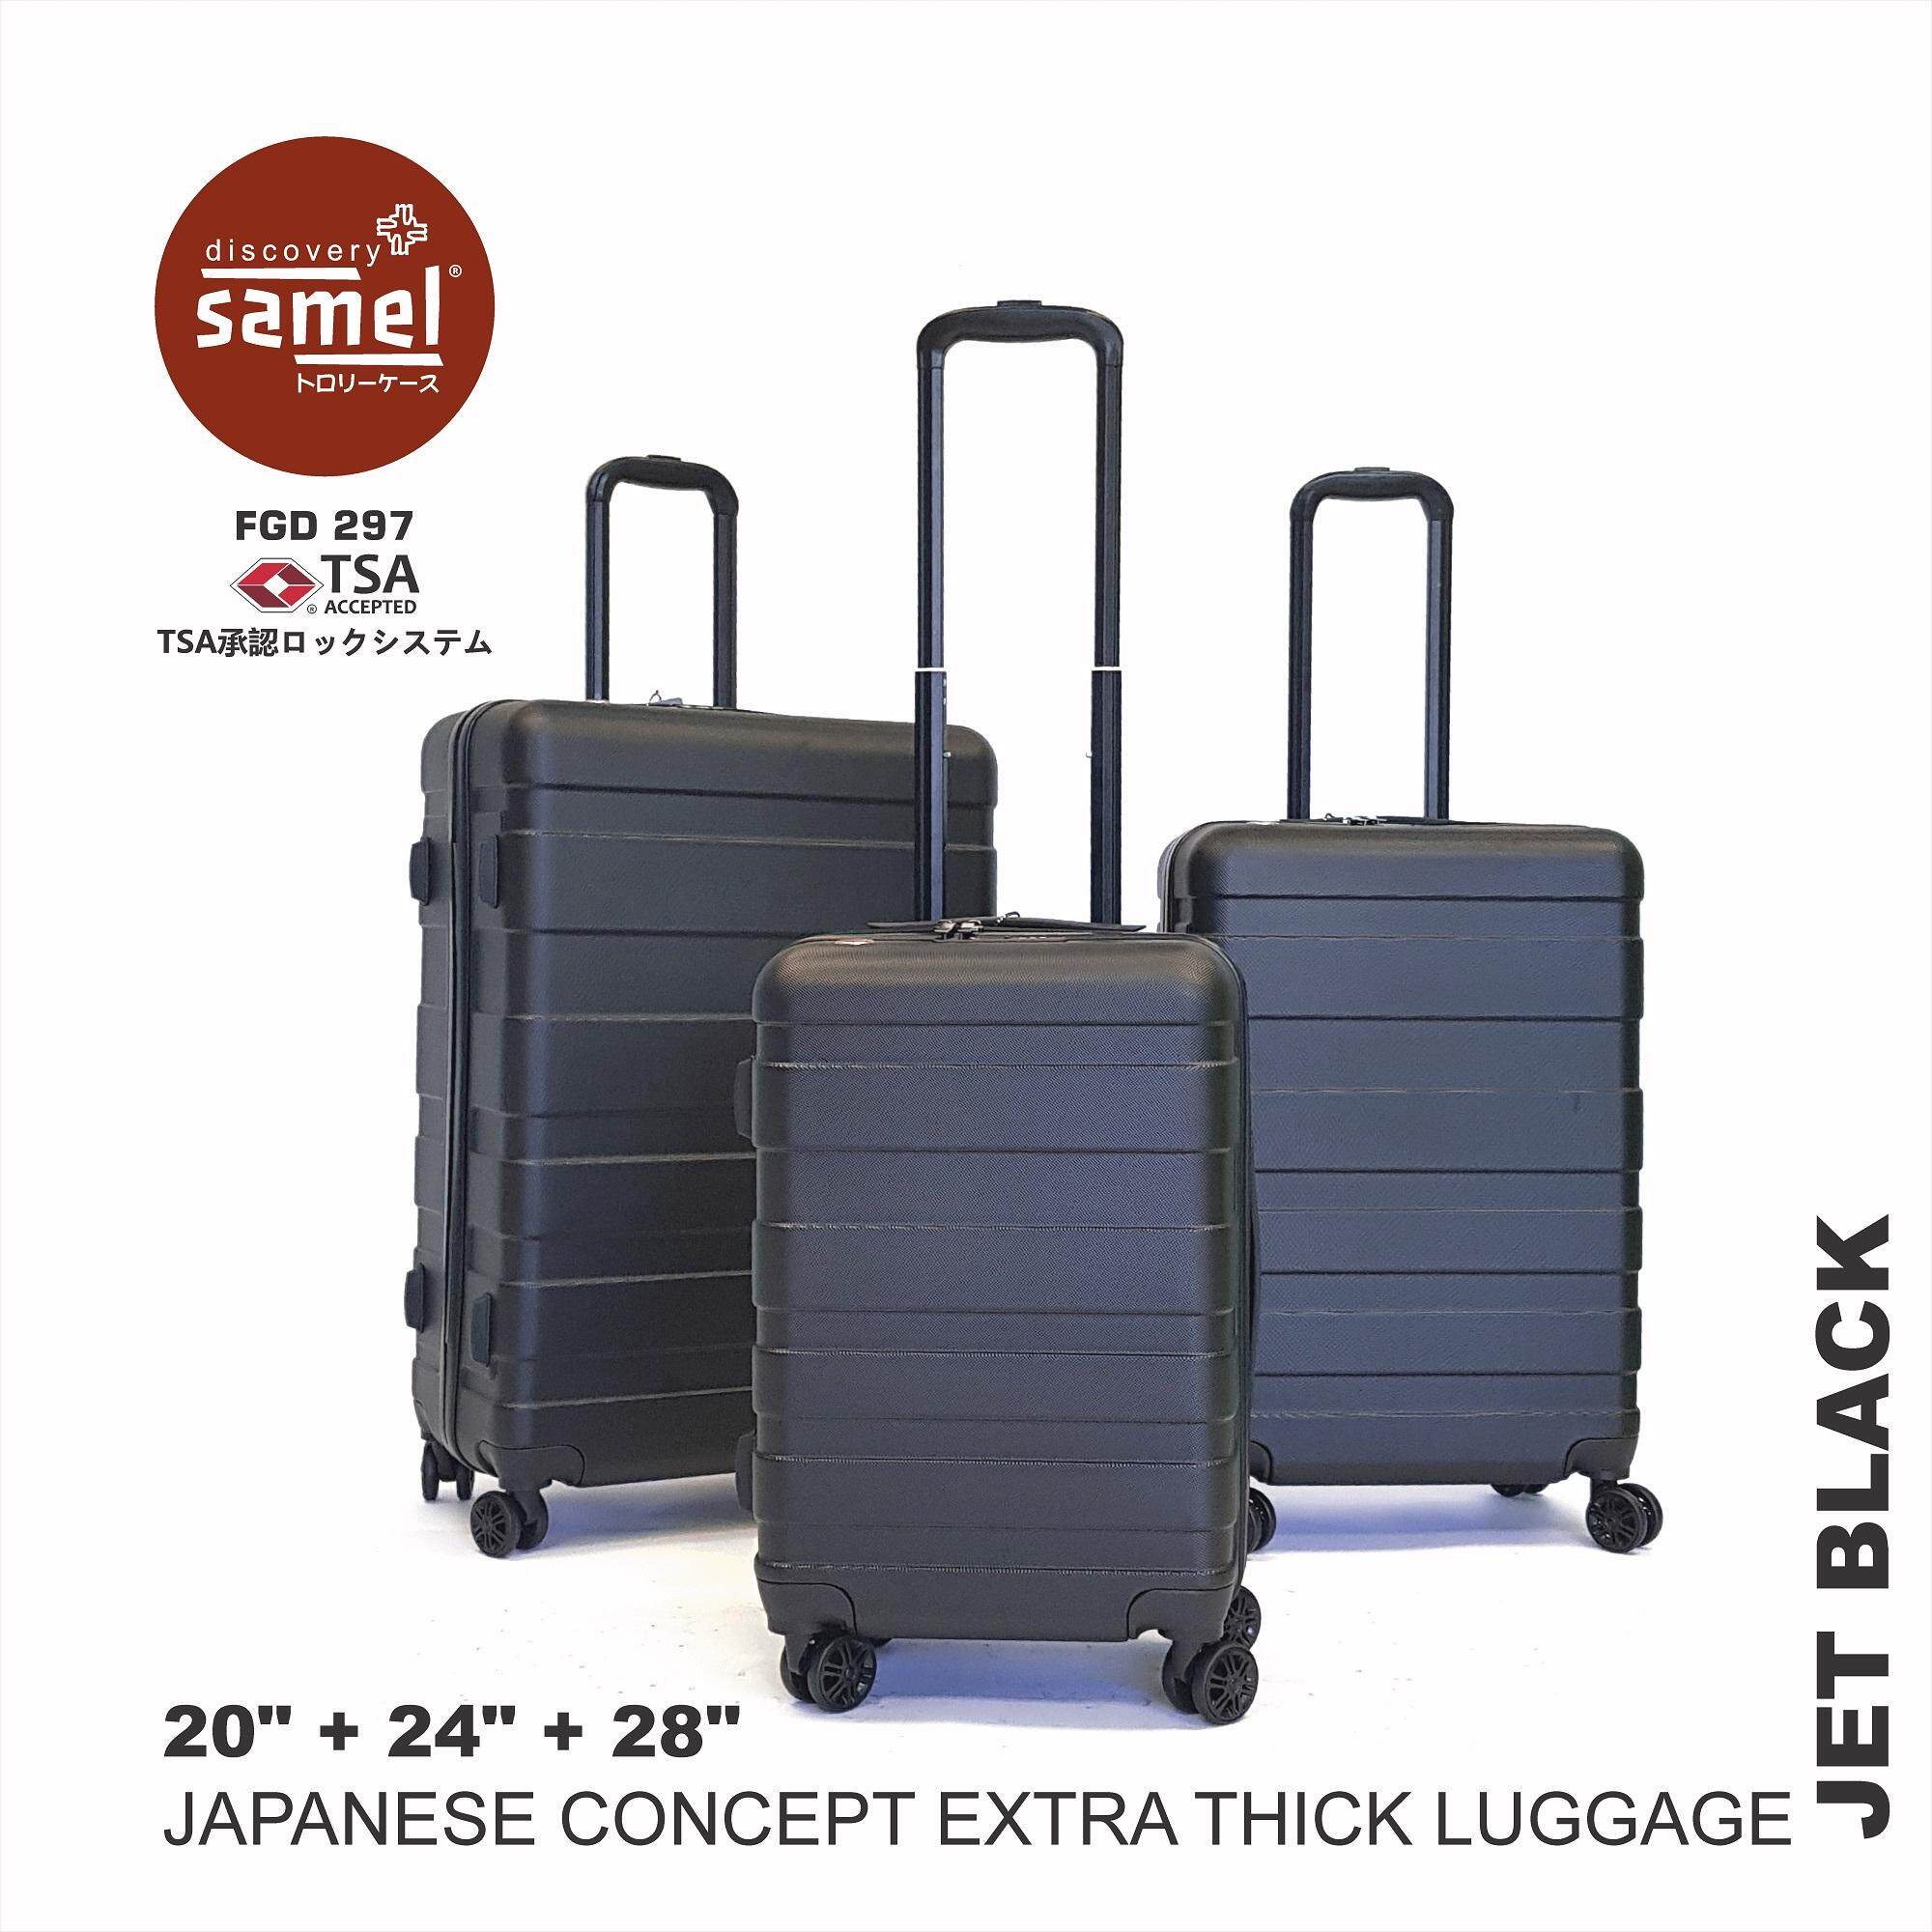 SAMEL FGD 297 JAPANESE CONCEPT EXTRA THICK LUGGAGE 3 IN 1 SET 20'' 24'' 28''